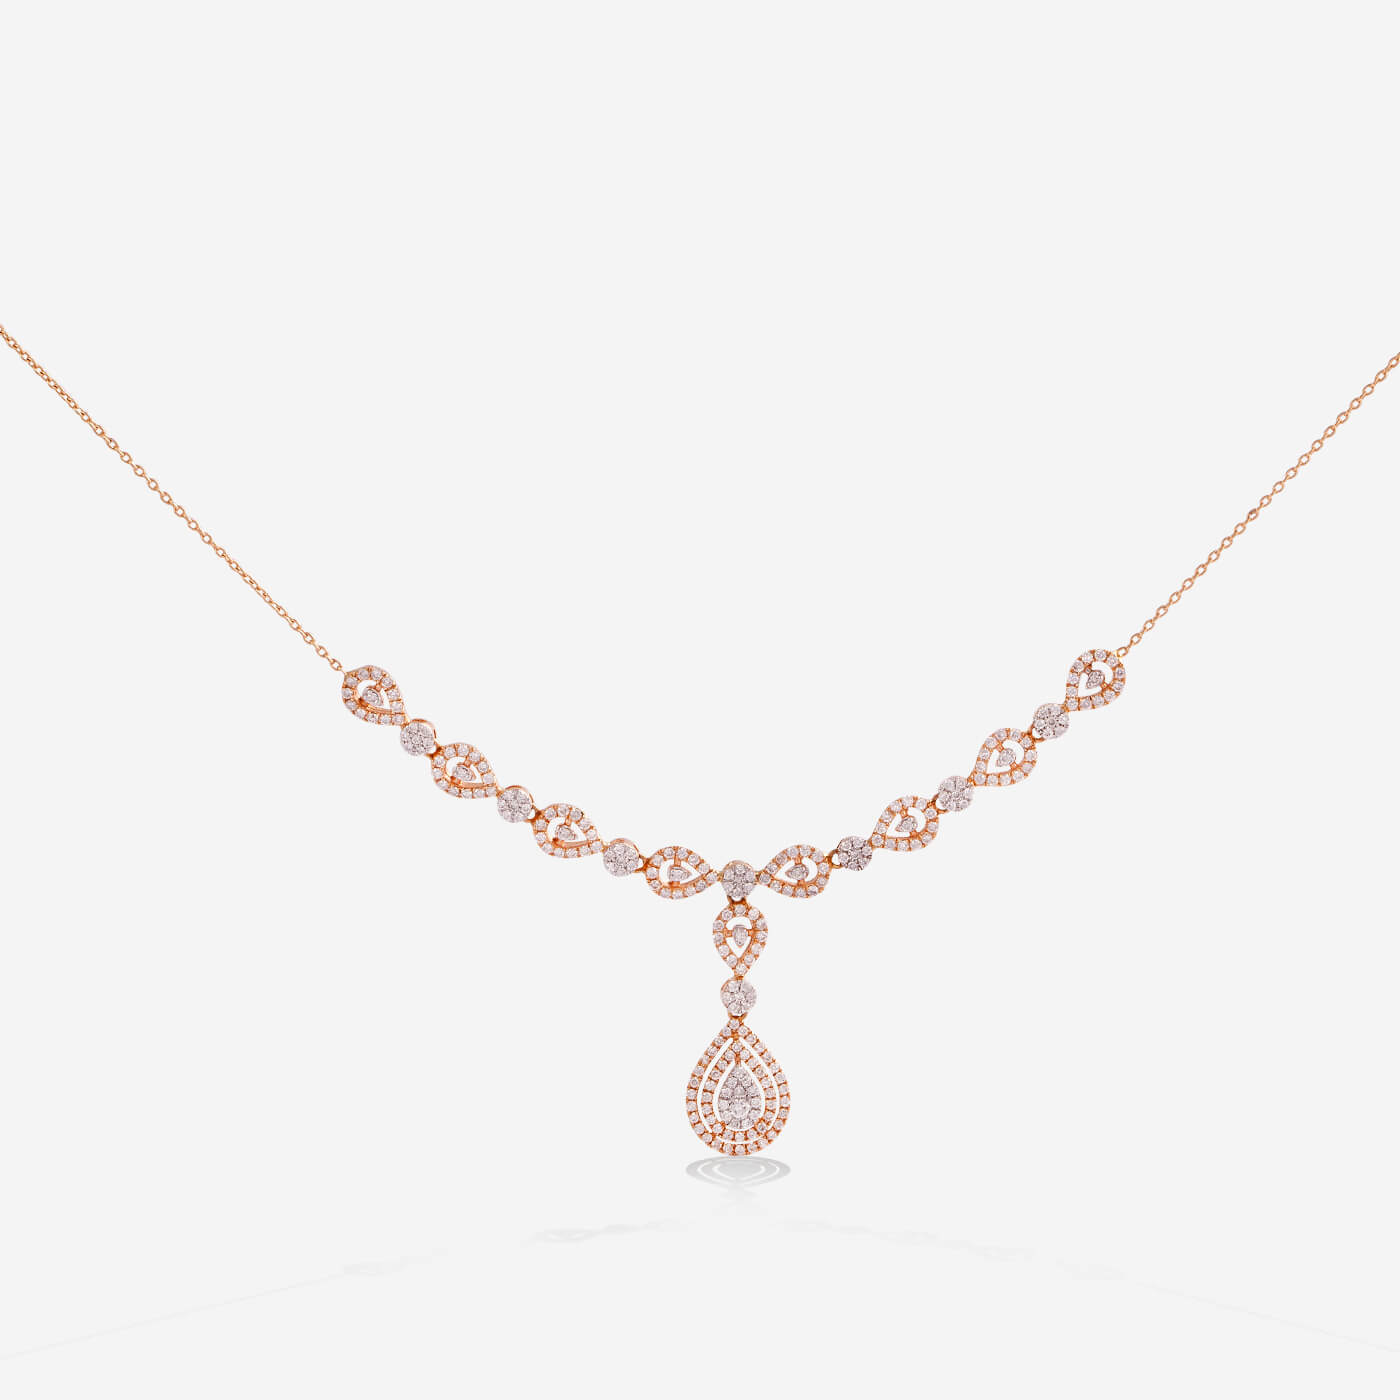 Rose Gold Drops With Diamonds Necklace - Ref: KG00011